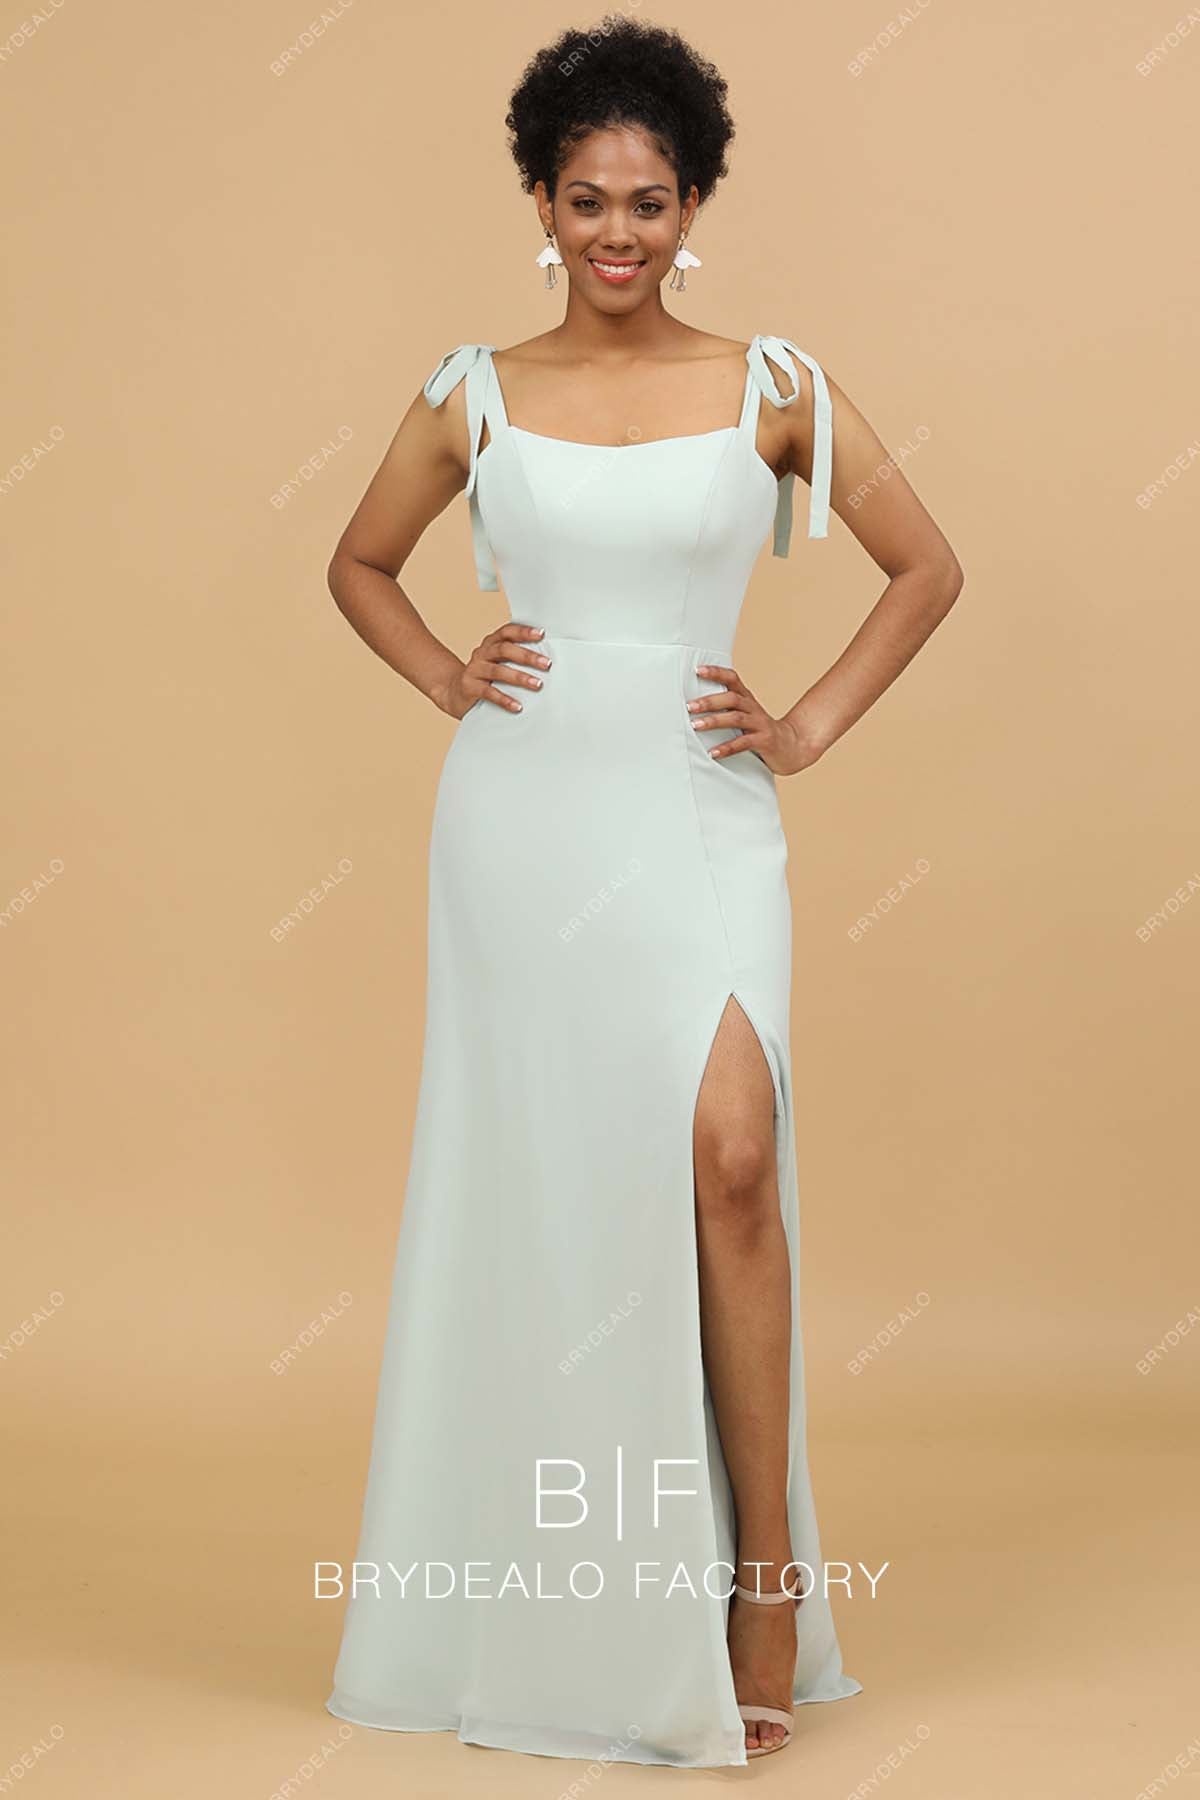 Shoulder Tie Fit and Flare Slit Chiffon Bridesmaid Dress